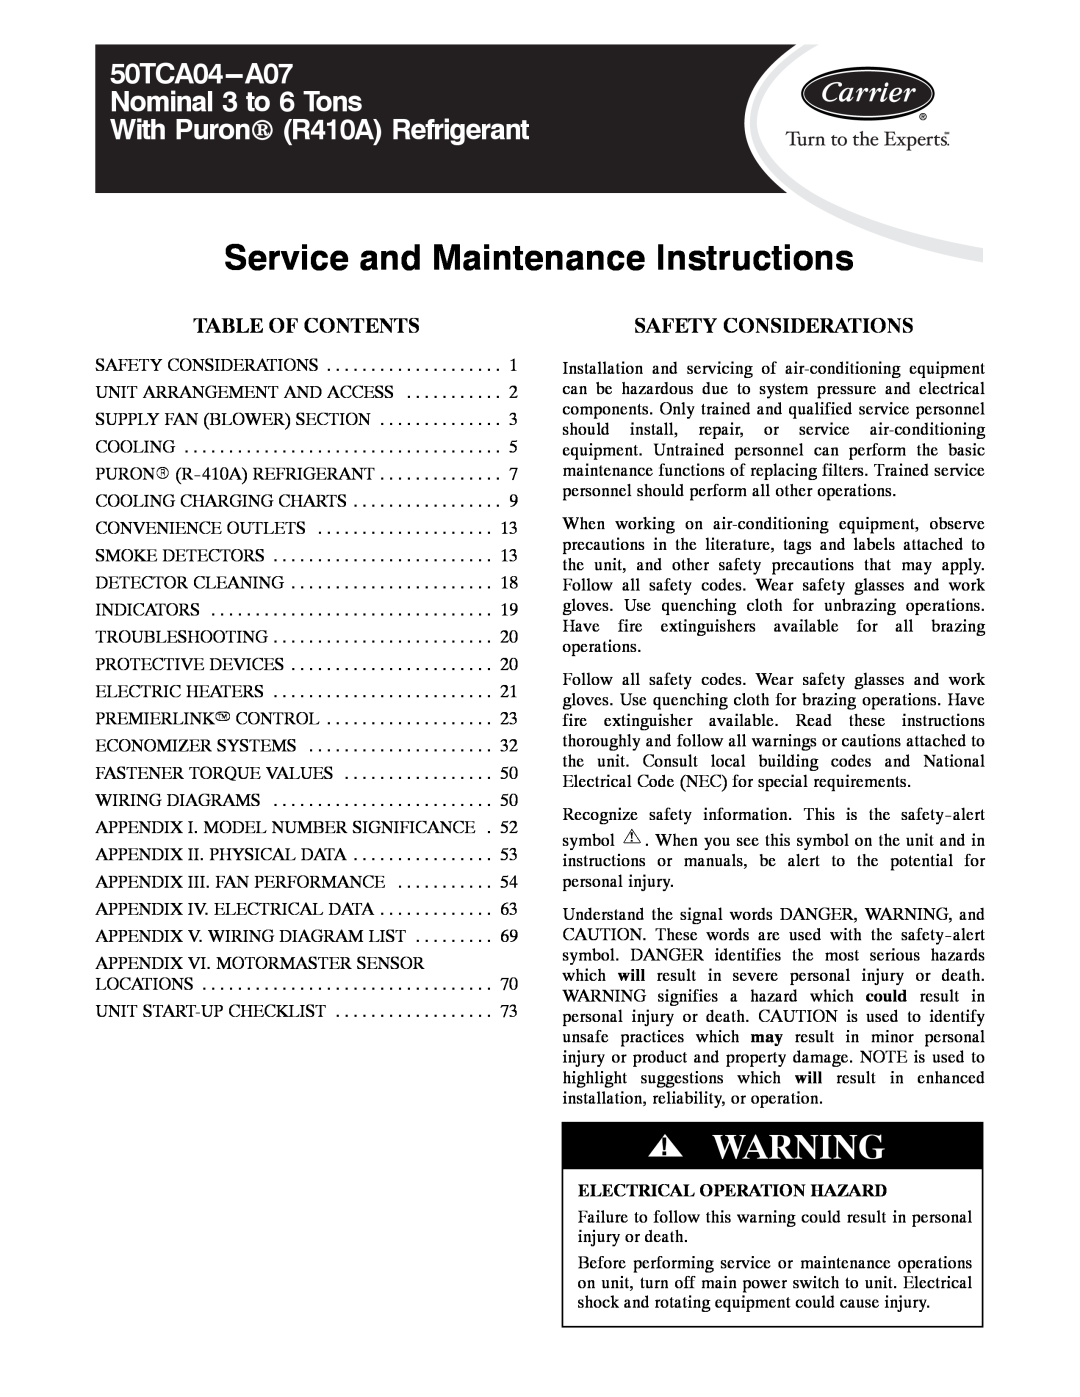 Carrier 50TCA04-A07 appendix Table Of Contents, Safety Considerations, Electrical Operation Hazard 